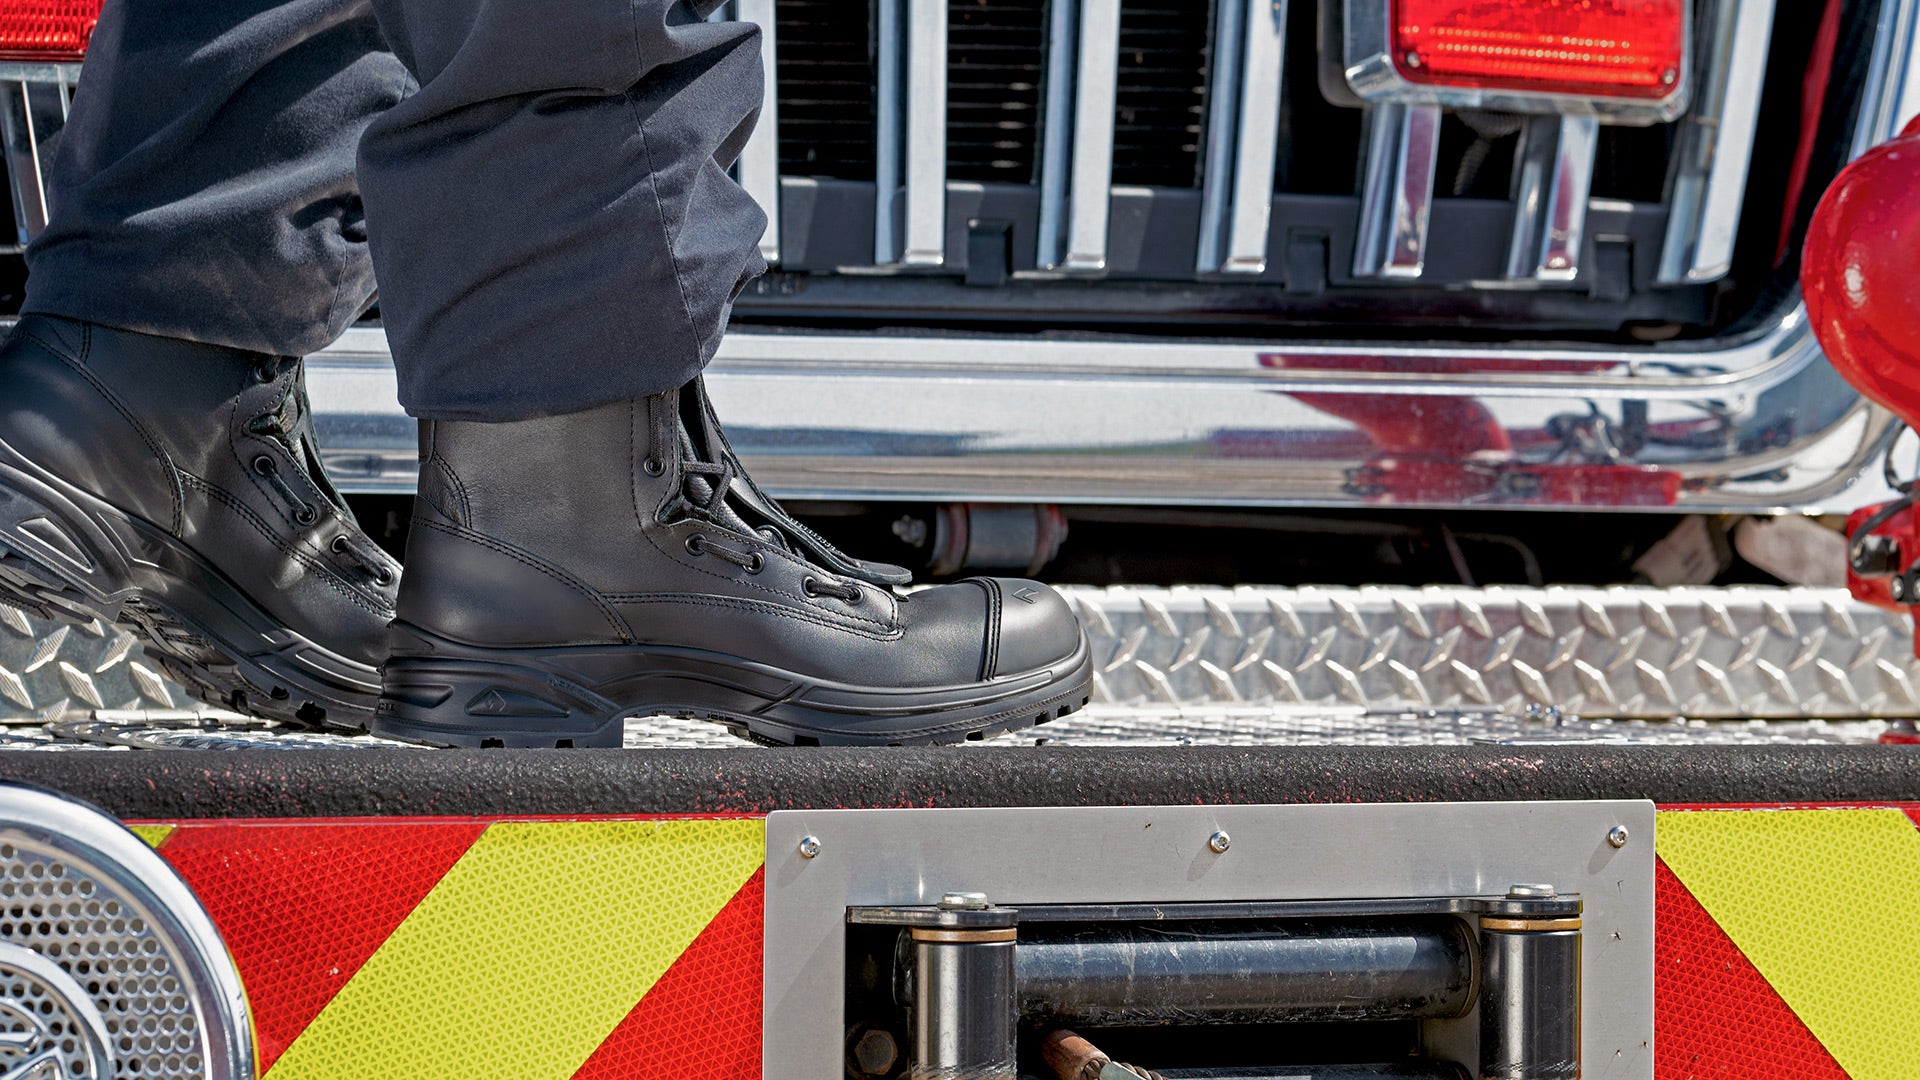 HAIX Airpower XR1 Pro Boot Women's (605129) | Fire Store | Fuego Fire Center | Firefighter Gear | Developed with first responders in mind, these wildland, EMS, and USAR boots can take you to the front line and back with the comfort you need when logging long hours on your feet. A multi-purpose leather boot that is NFPA certified, you have the convenience of three boots in one. Wear it in the station, on EMS calls, to wildland brush fires, and Urban Search and Rescue deployments.